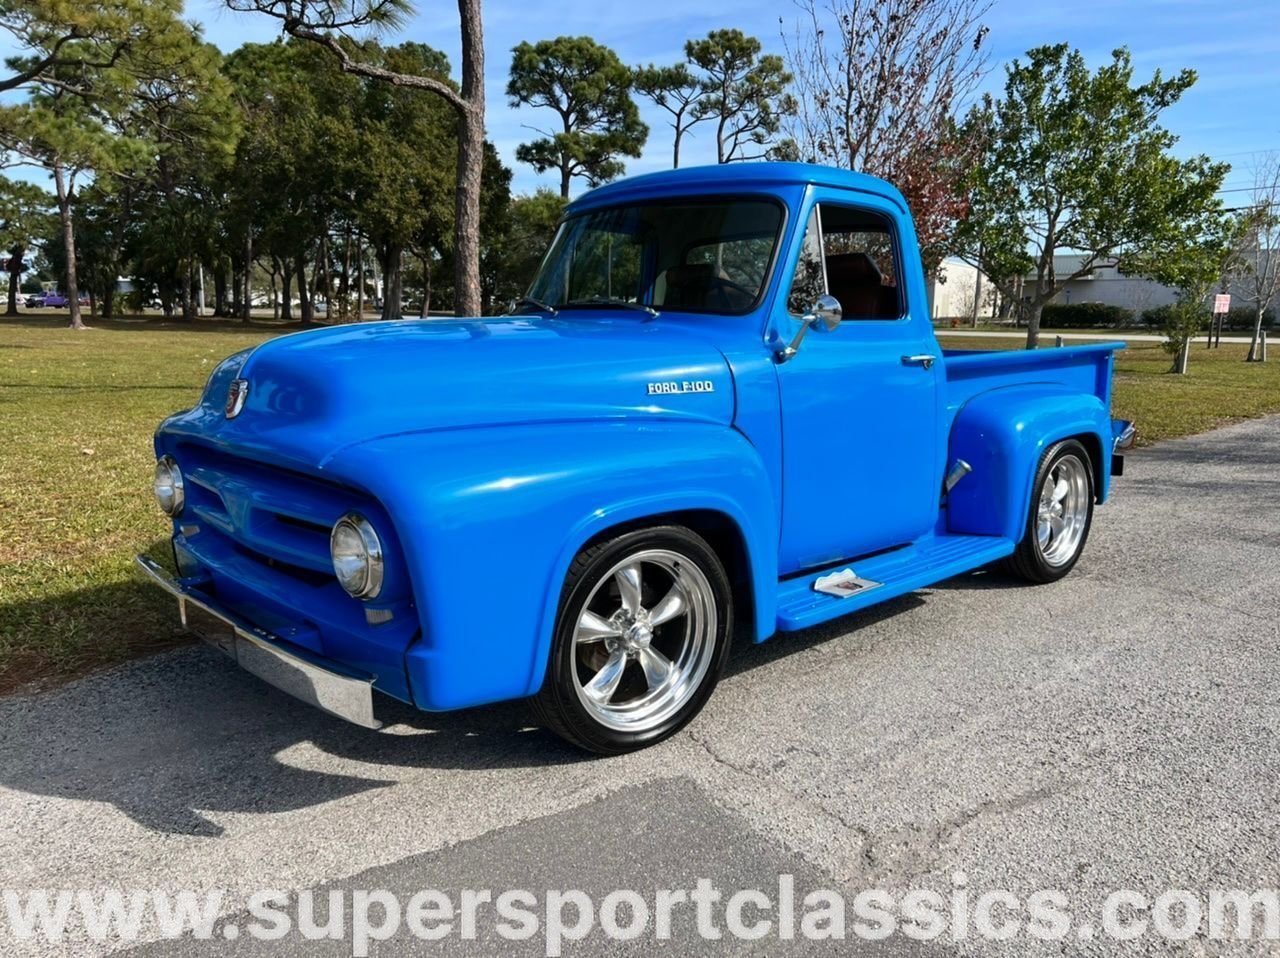 1953 Ford F100 Classic And Collector Cars